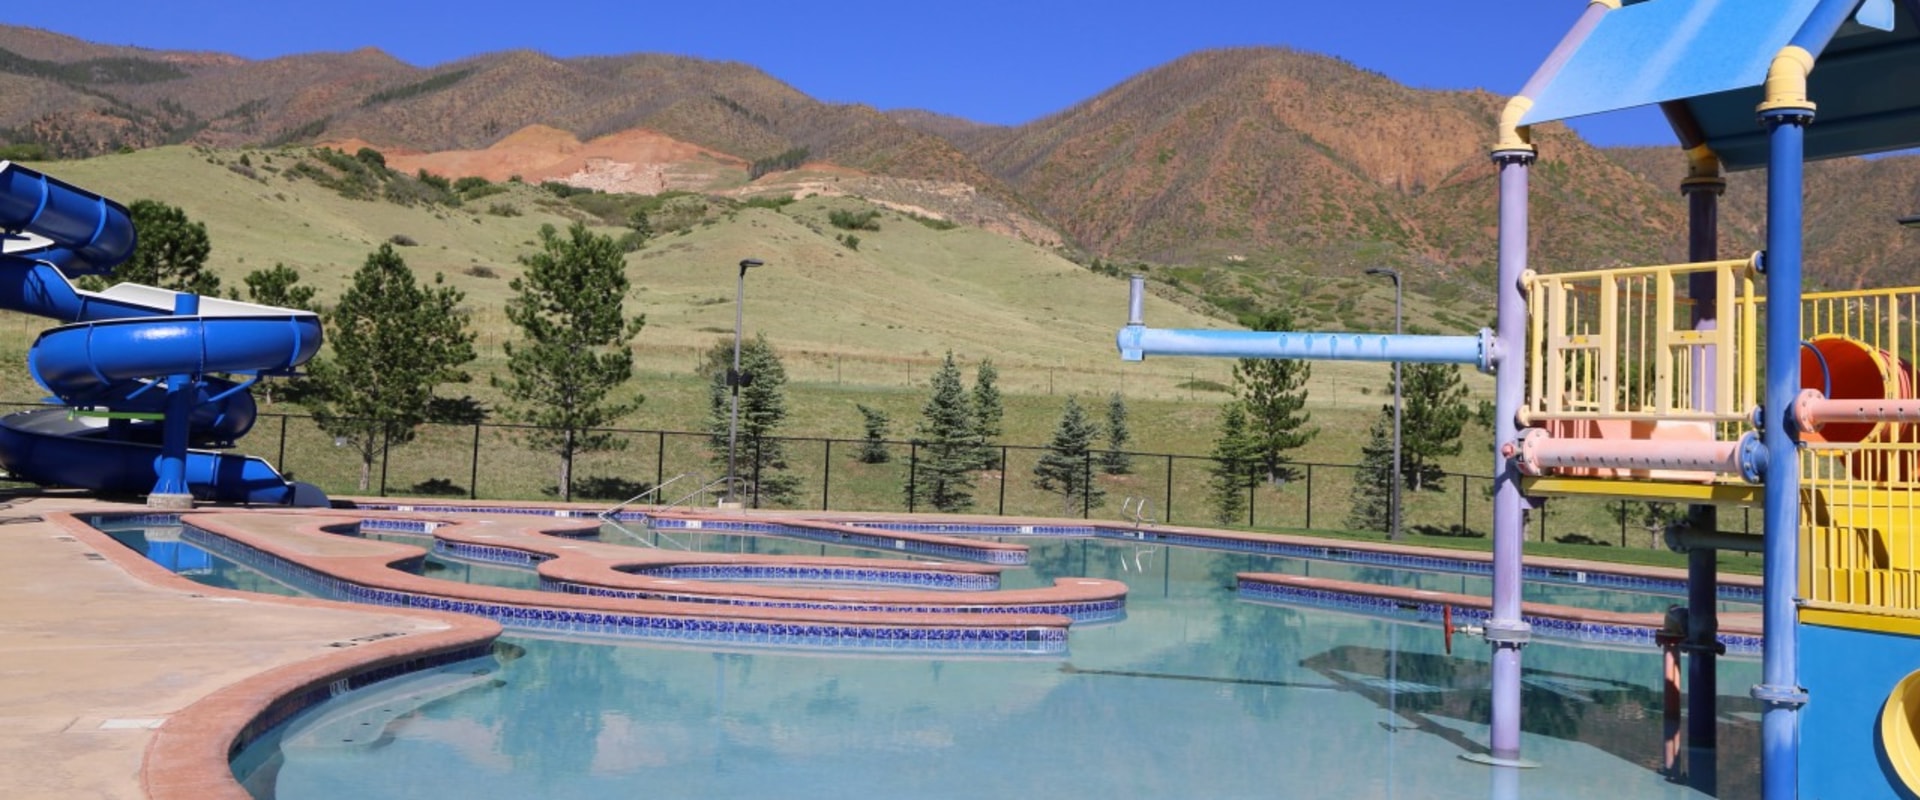 Swimming in Colorado Springs: Where to Go and What to Know